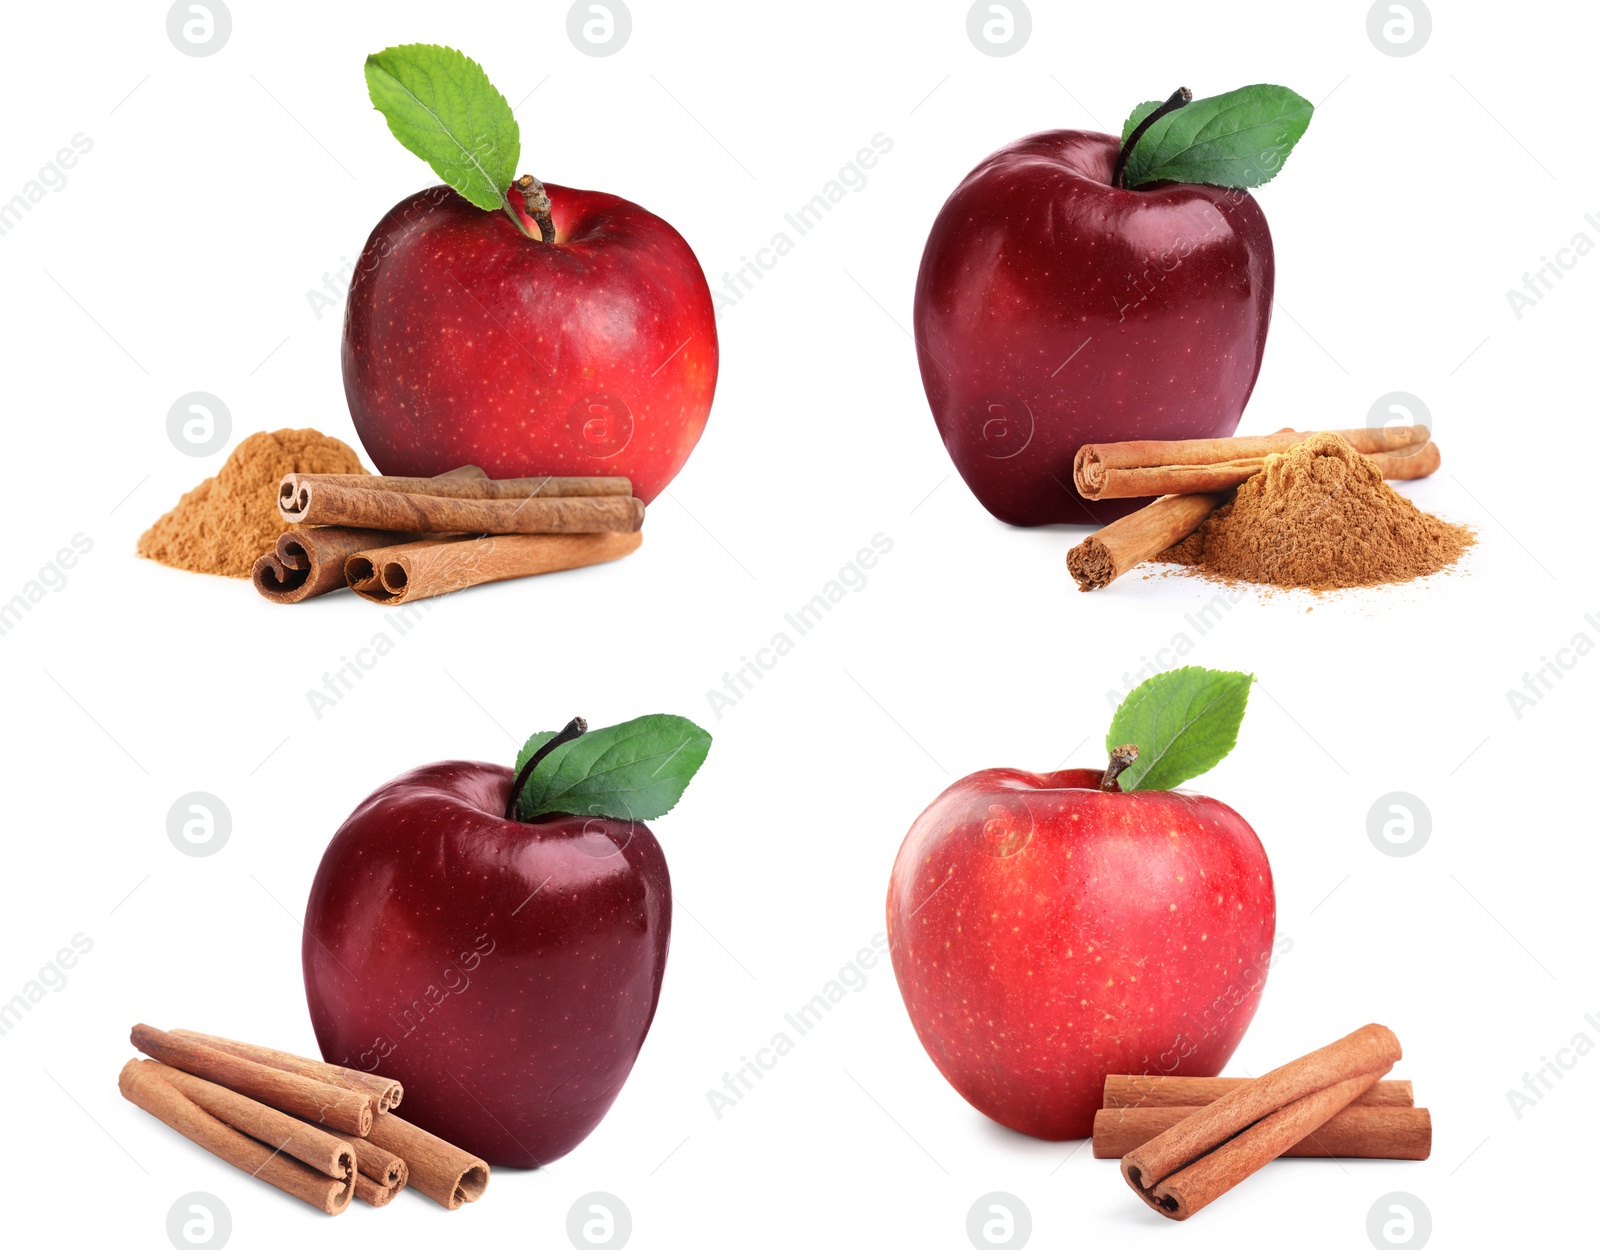 Image of Aromatic cinnamon sticks and red apples isolated on white, set